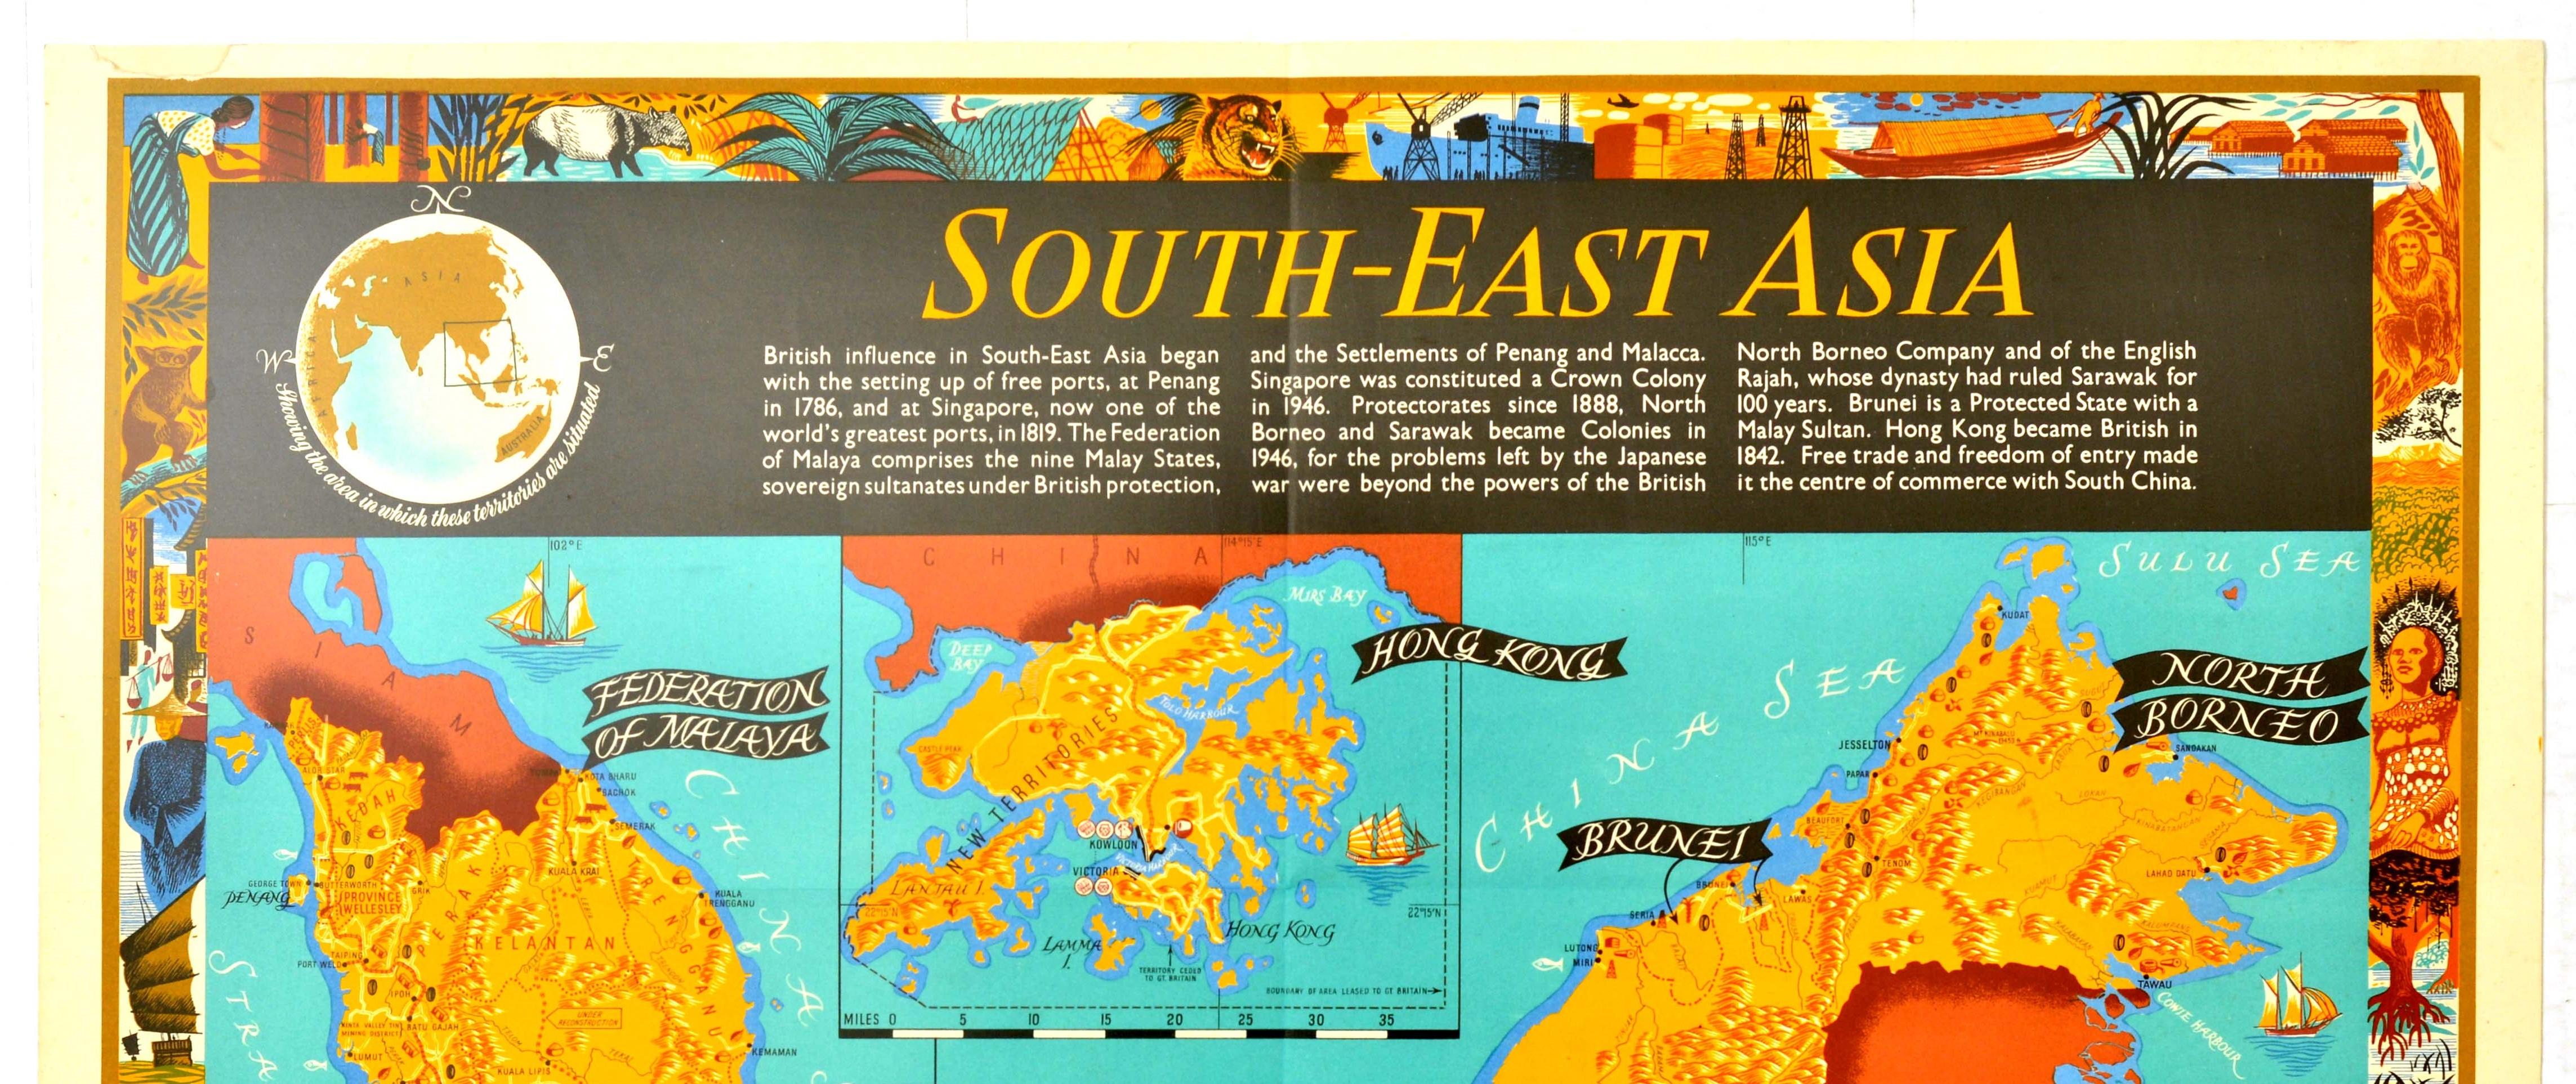 Original vintage poster map for South East Asia with information on the history of British settlements and colonies in the Federation of Malaya (Malaysia), Singapore, Hong Kong, Sarawak, Brunei and North Borneo labelled on the colourful map designed